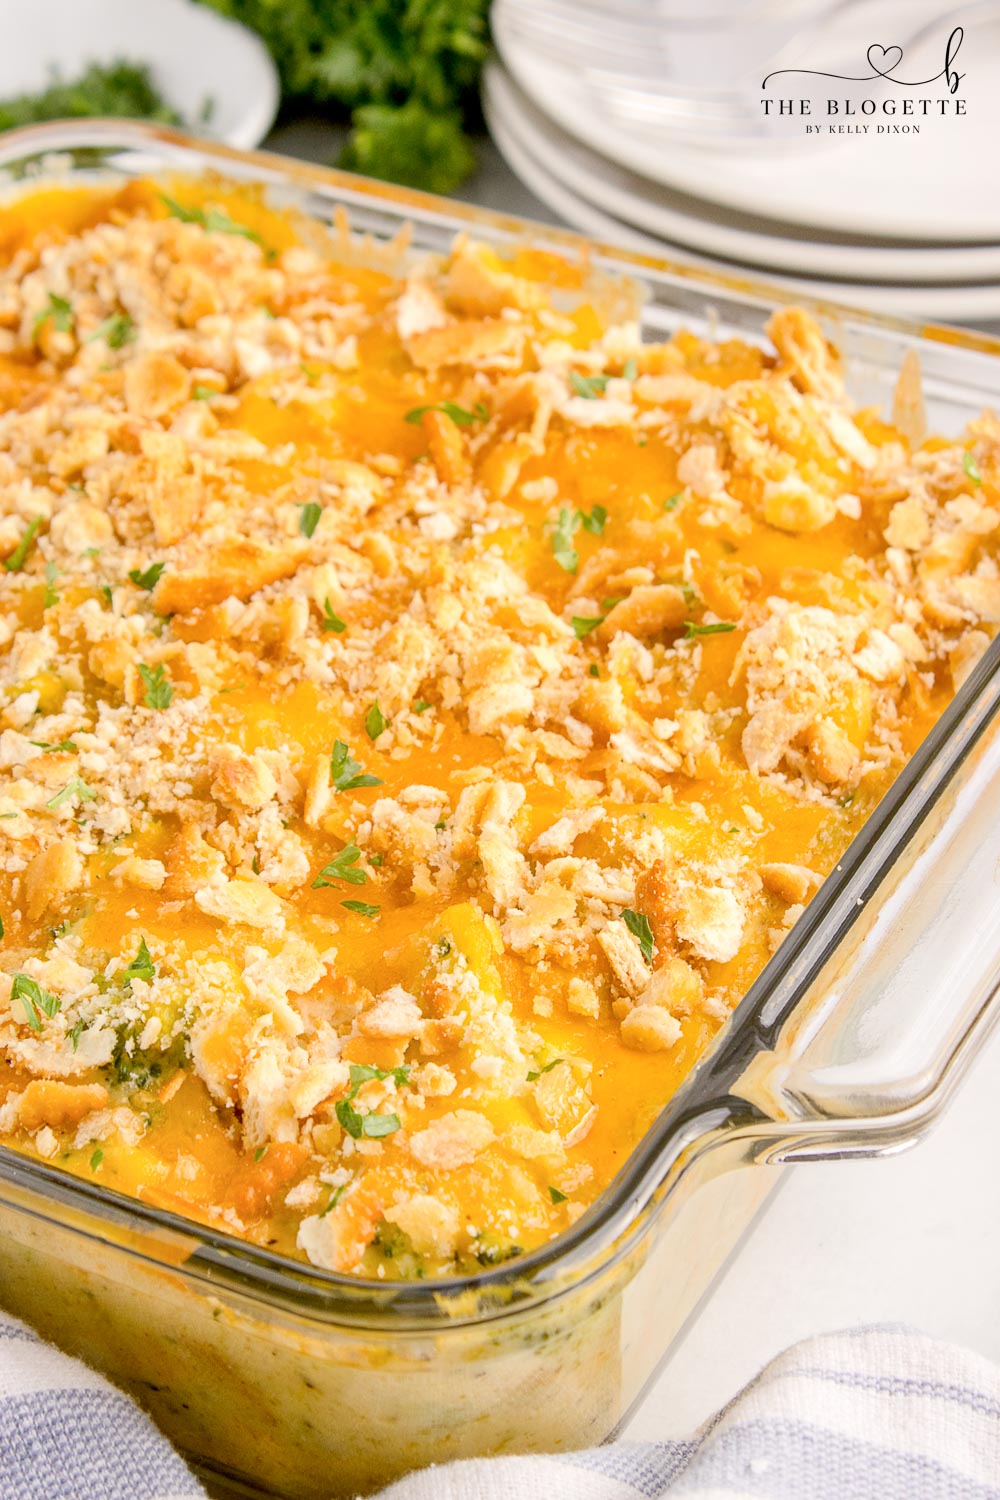 Chicken and broccoli casserole with cheese and butter crackers